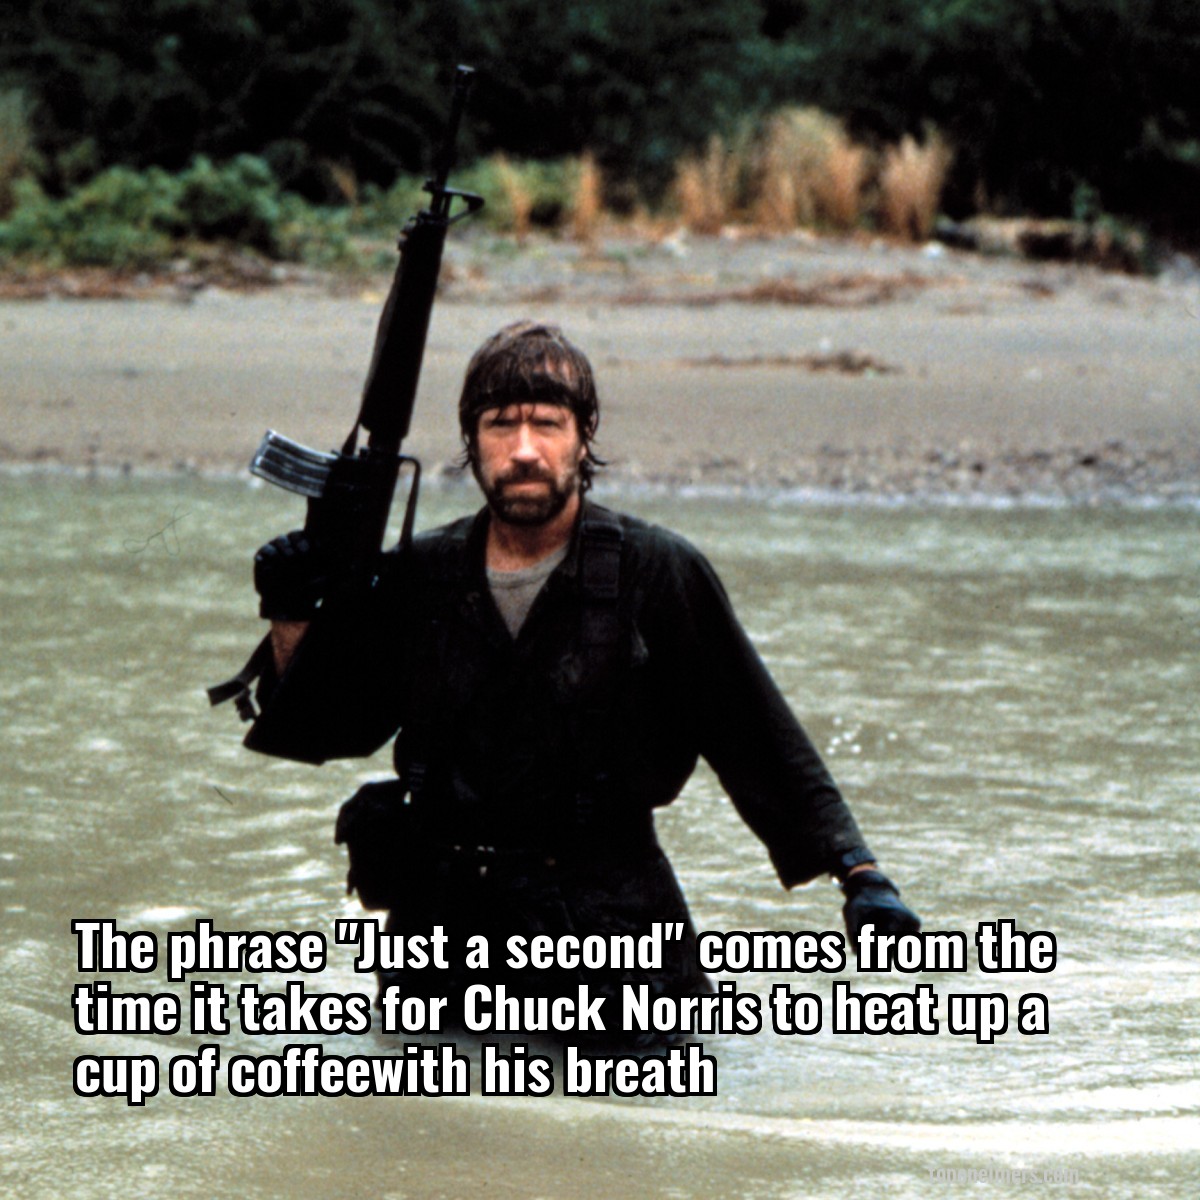 The phrase "Just a second" comes from the time it takes for Chuck Norris to heat up a cup of coffeewith his breath